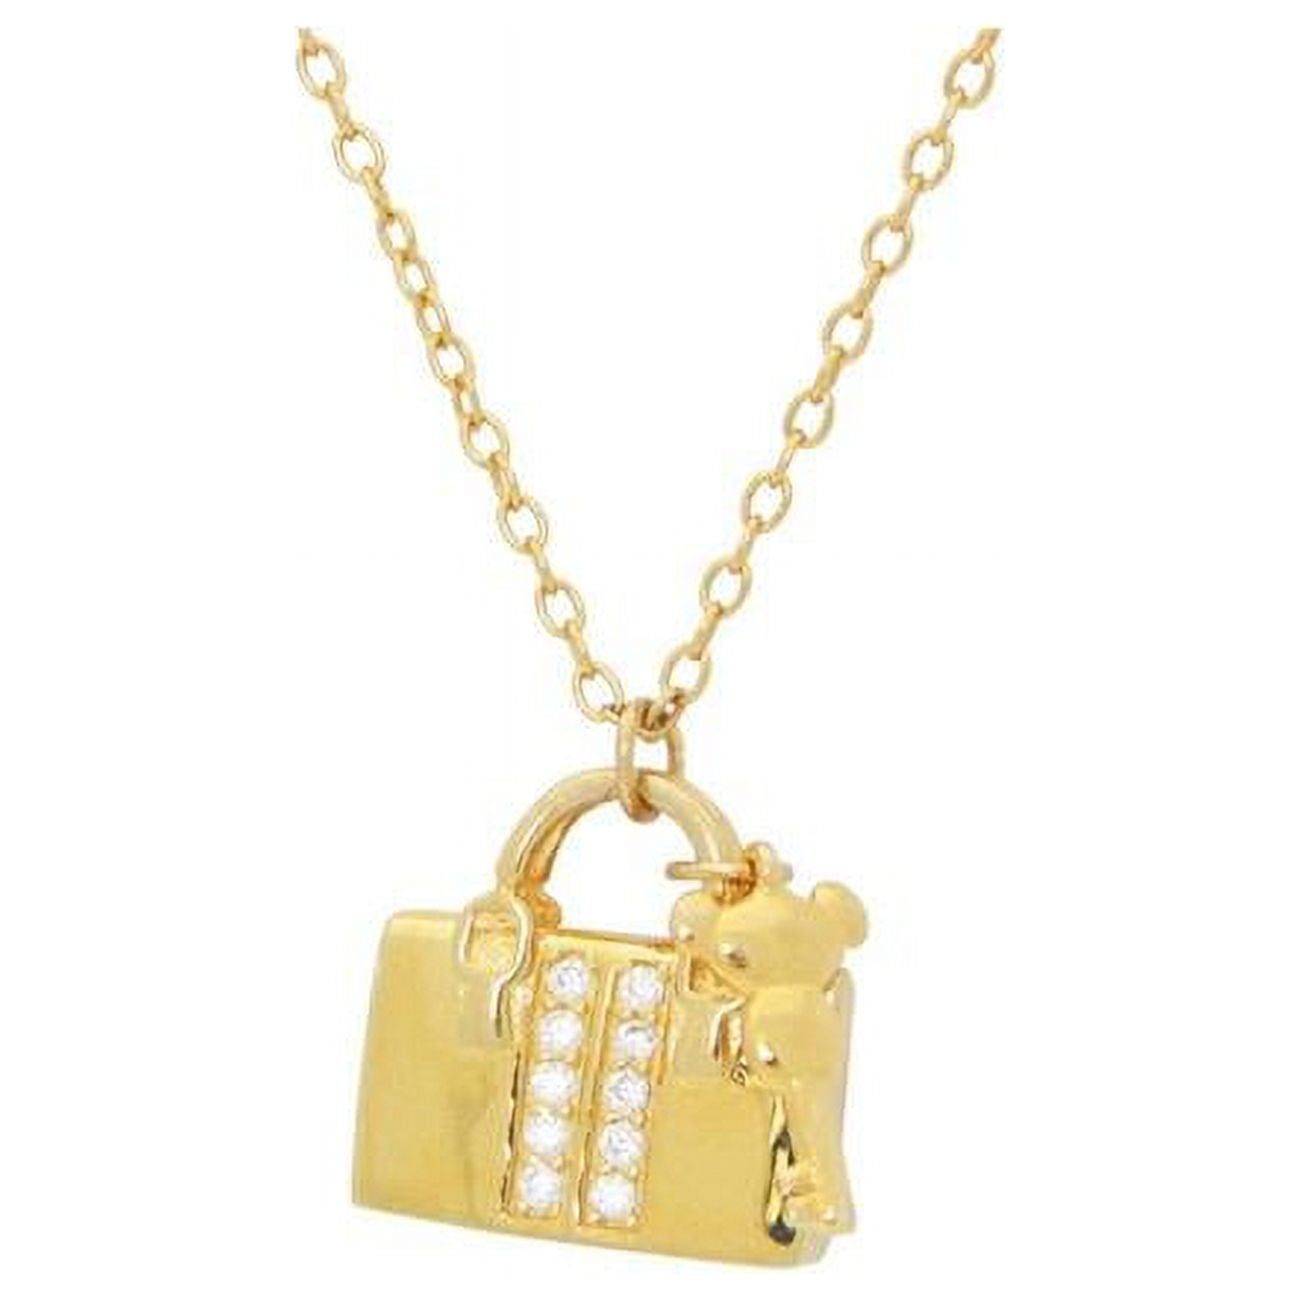 111203g 16 & 2 In. Teen Sparkling Cz Purse & Key Pendant Necklace In Vermeil